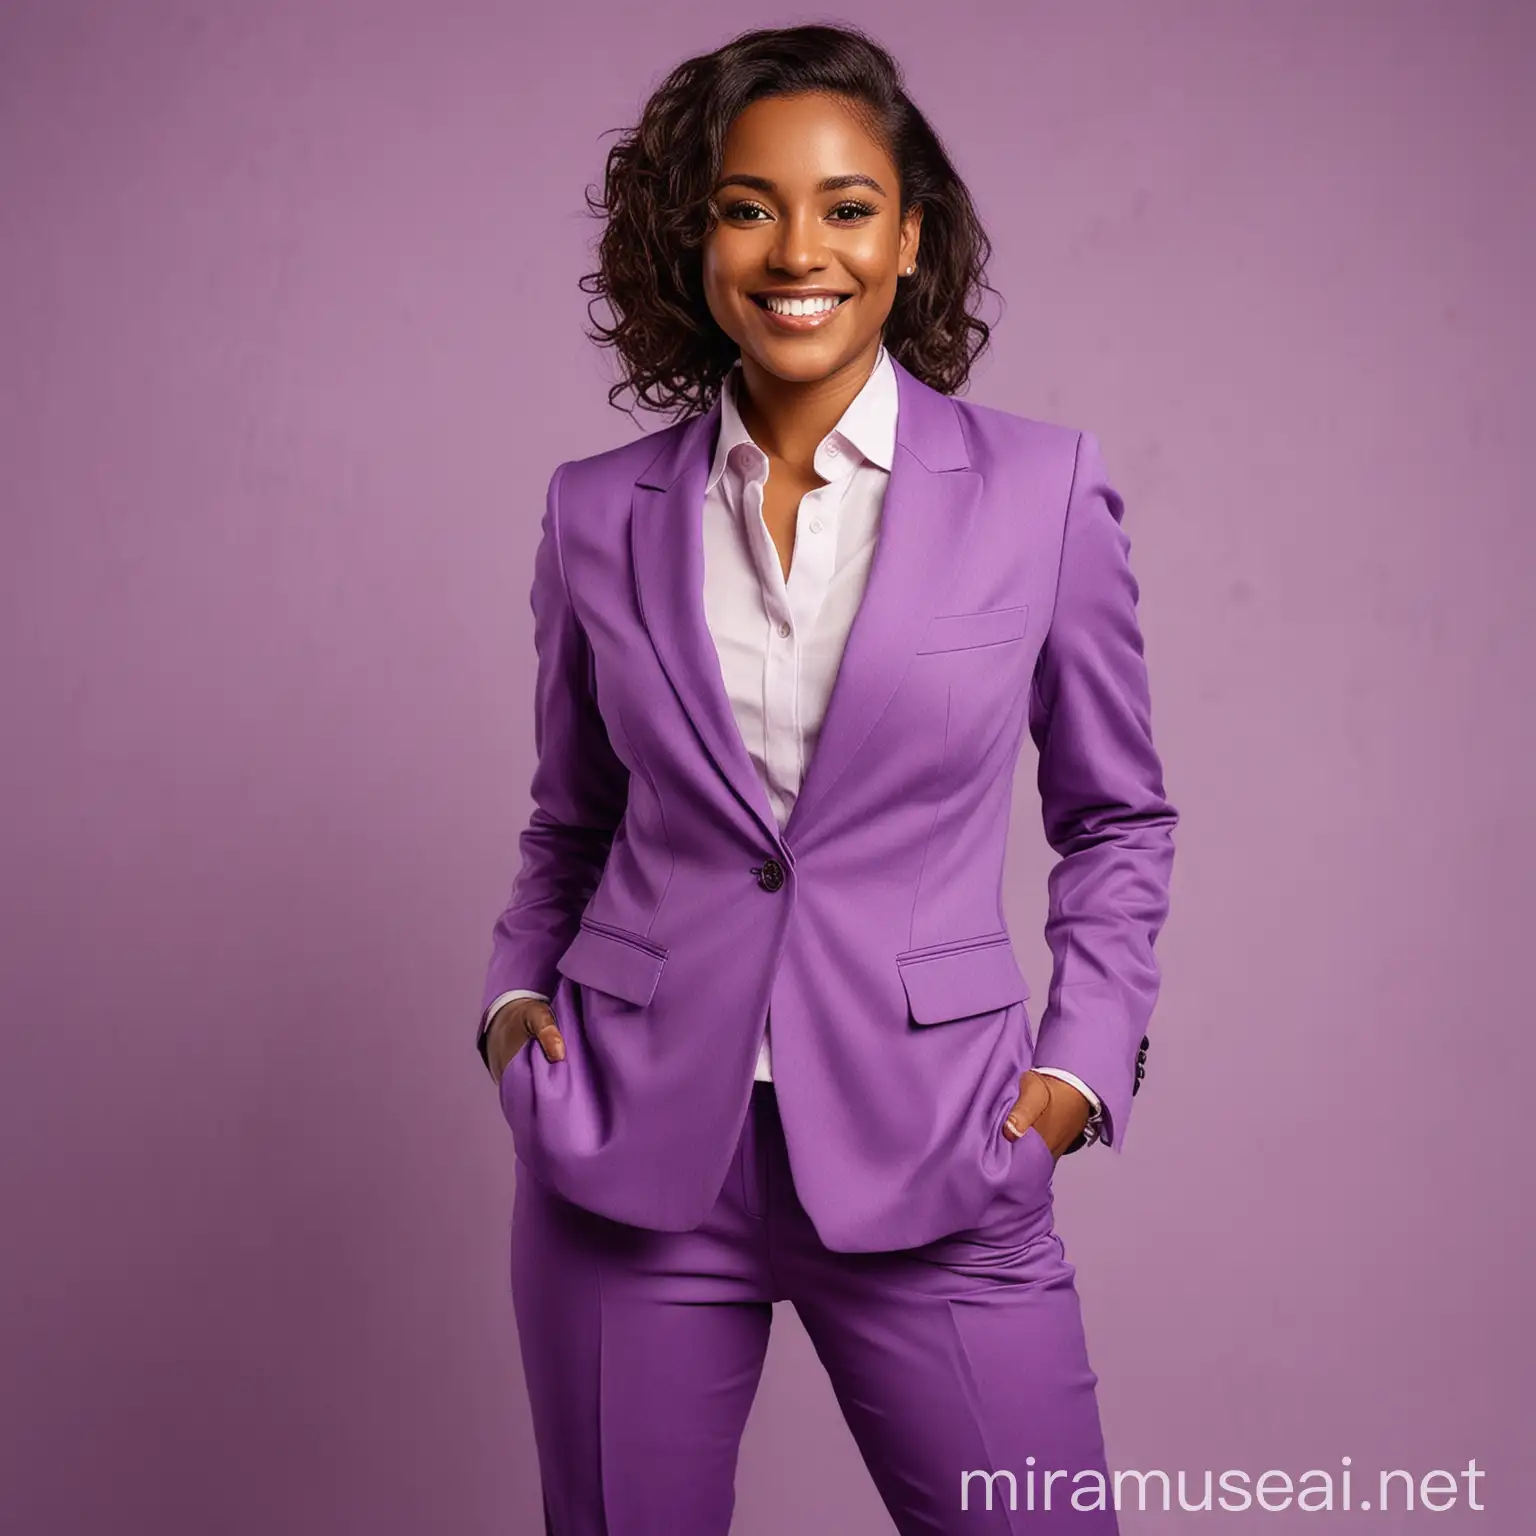 Professional African American Woman in Purple Suit Smiling